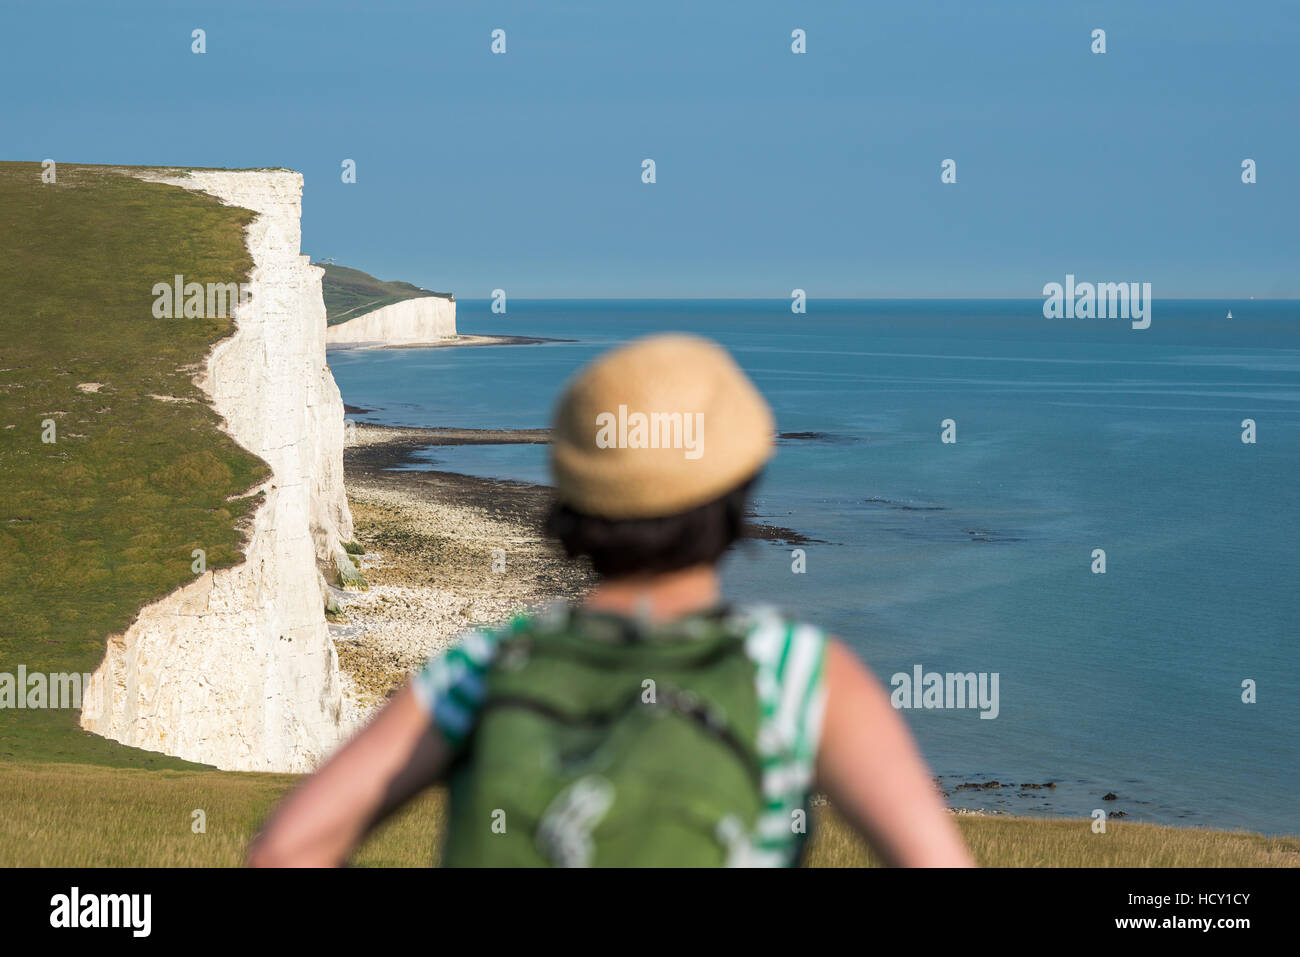 A woman looks out over the cliffs with views of the Seven Sisters coastline, South Downs National Park, East Sussex, UK Stock Photo